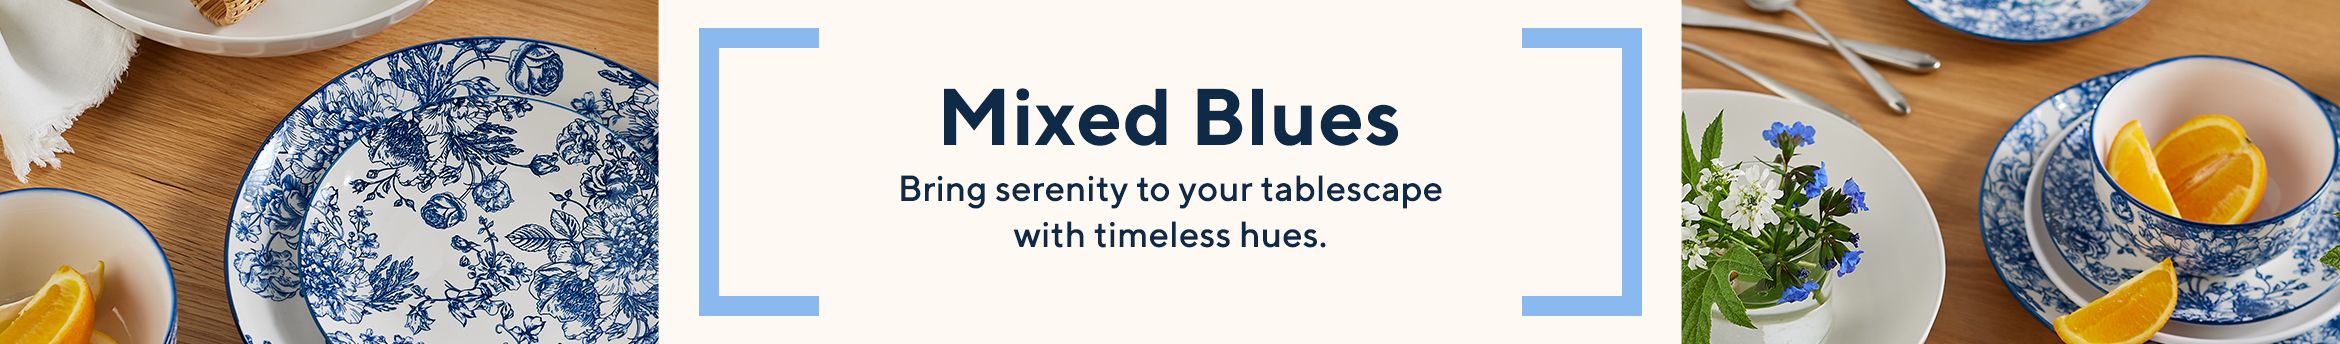 Mixed Blues. Bring serenity to your tablescape with timeless hues.